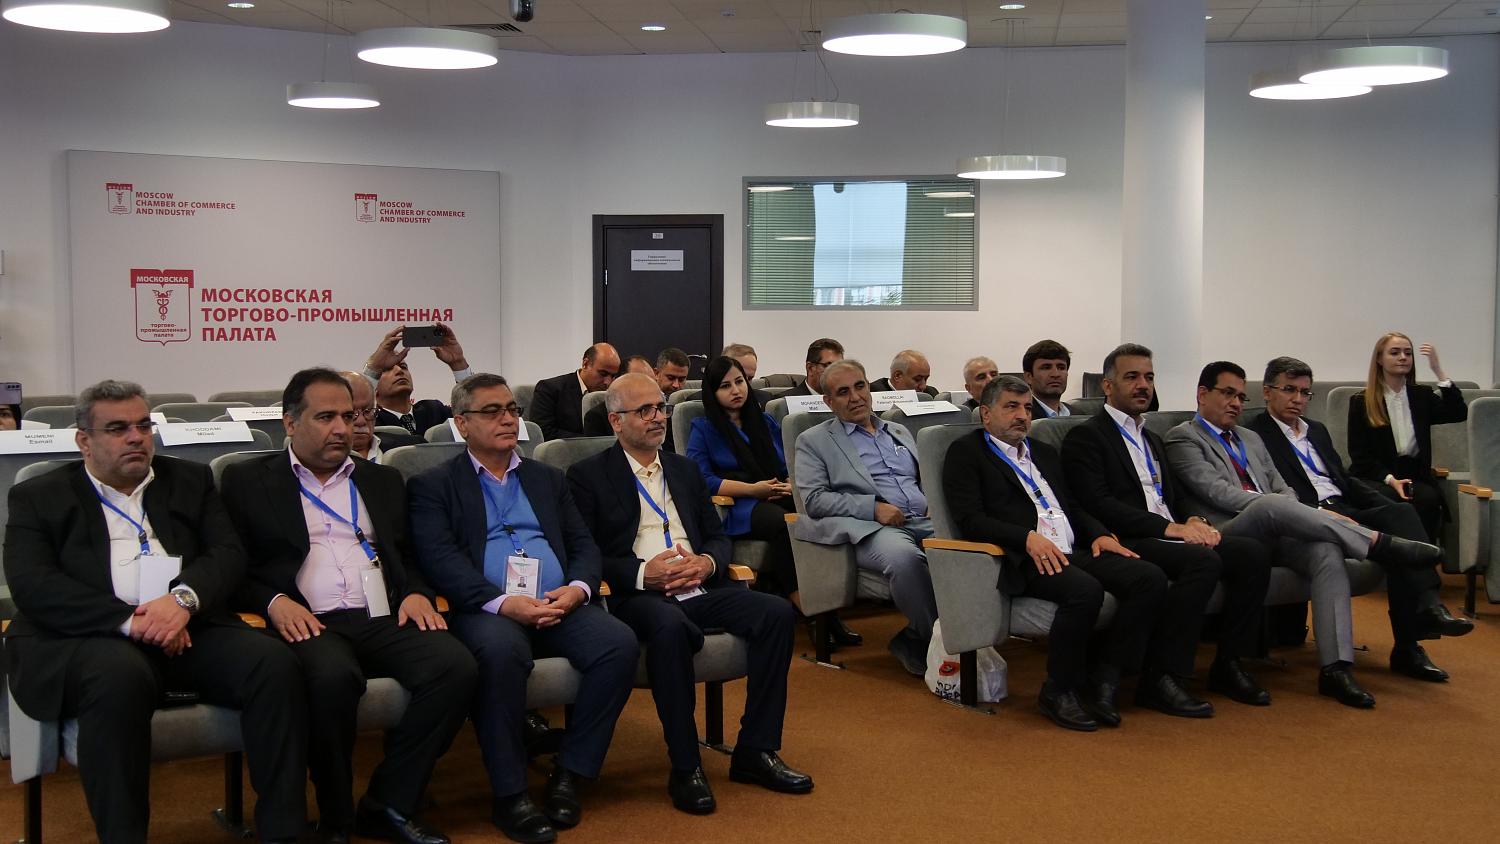 A business delegation from Iran's Bushehr Province was welcomed in the MCCI